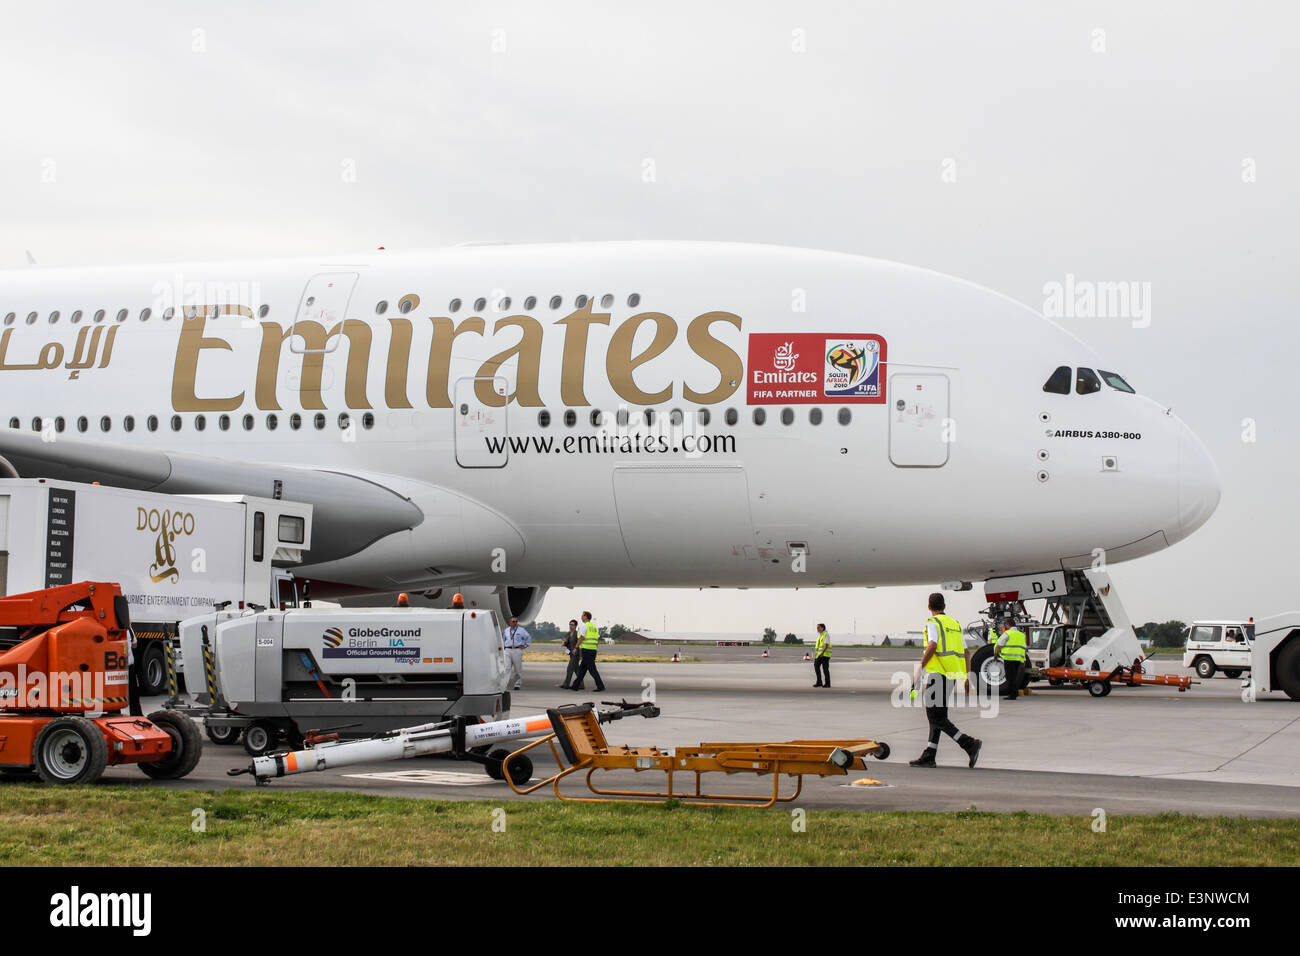 Emirates Airline Airbus a-380 immer Erden Service. Stockfoto